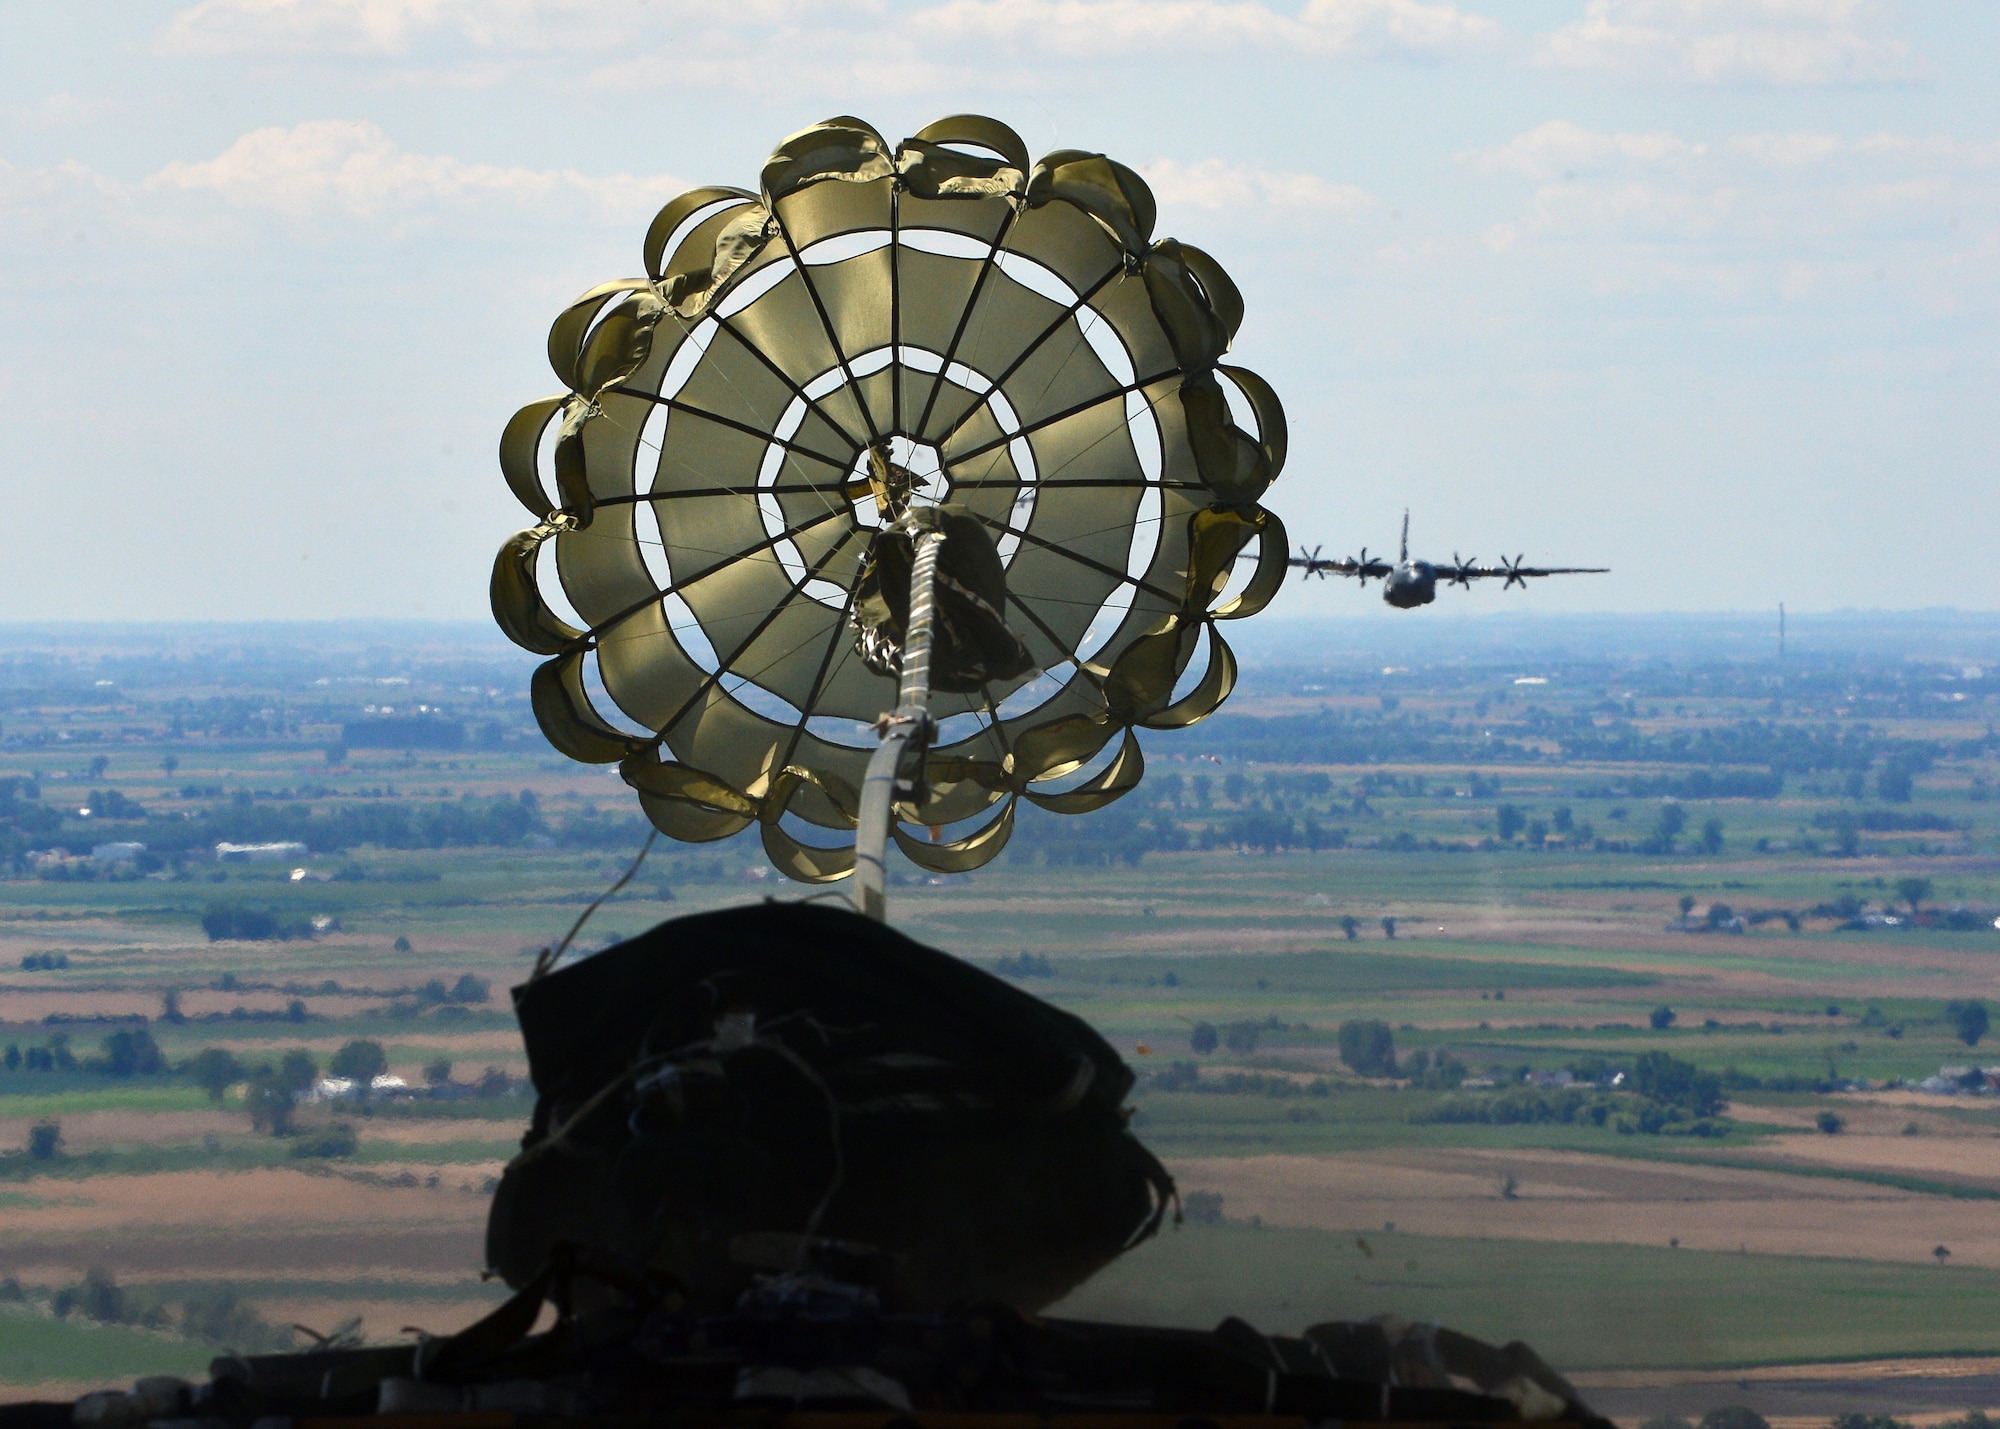 A parachute deploys from an airdrop platform during an Aviation Rotation 19-3 training flight over Powidz Air Base, Poland, July 18, 2019. Aircrew members performed low-cost low-altitude, container delivery system, and heavy equipment air drops to maintain operation proficiency. (U.S. Air Force photo by Staff Sgt. Jimmie D. Pike)